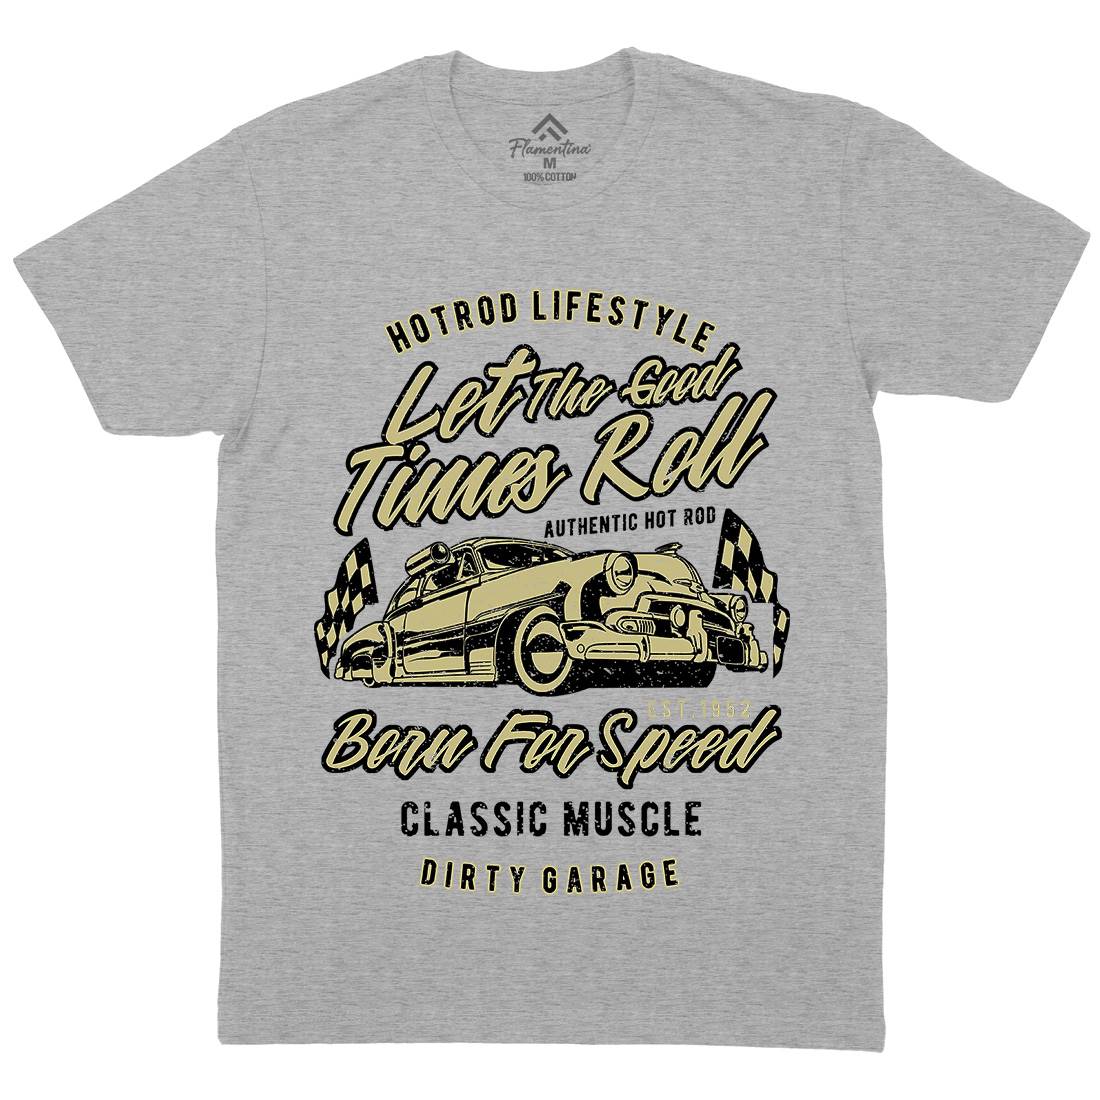 Let The Good Times Roll Mens Organic Crew Neck T-Shirt Cars A705